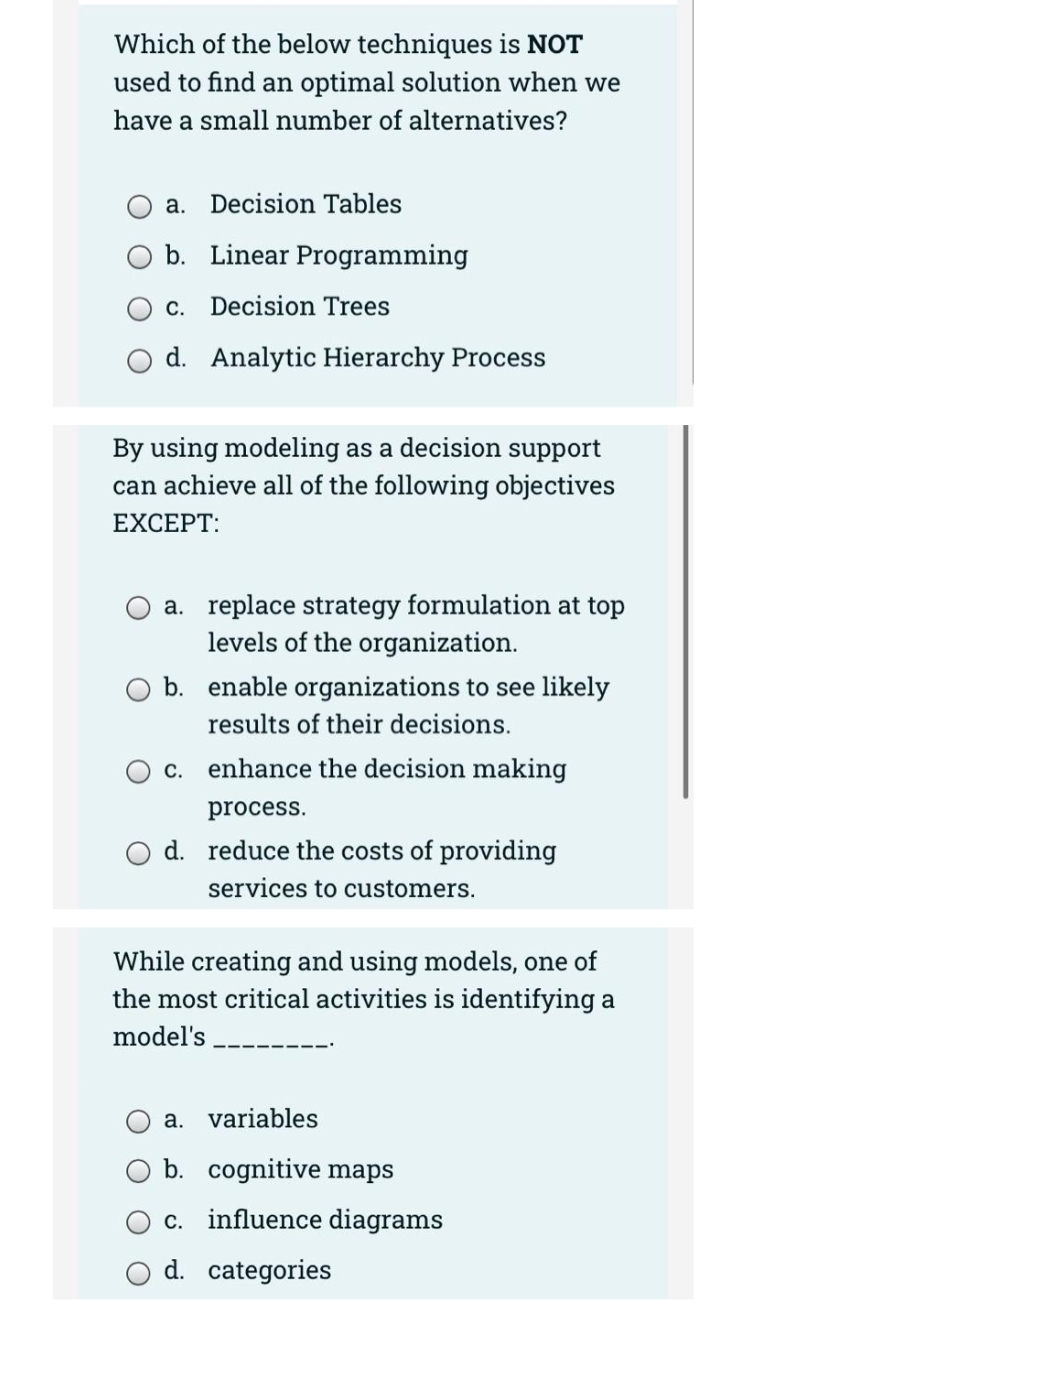 Which of the below techniques is NOT
used to find an optimal solution when we
have a small number of alternatives?
a. Decision Tables
b. Linear Programming
c. Decision Trees
d. Analytic Hierarchy Process
By using modeling as a decision support
can achieve all of the following objectives
EXCEPT:
a. replace strategy formulation at top
levels of the organization.
b. enable organizations to see likely
results of their decisions.
С.
enhance the decision making
process.
d. reduce the costs of providing
services to customers.
While creating and using models, one of
the most critical activities is identifying a
model's
a. variables
b. cognitive maps
c. influence diagrams
d. categories
